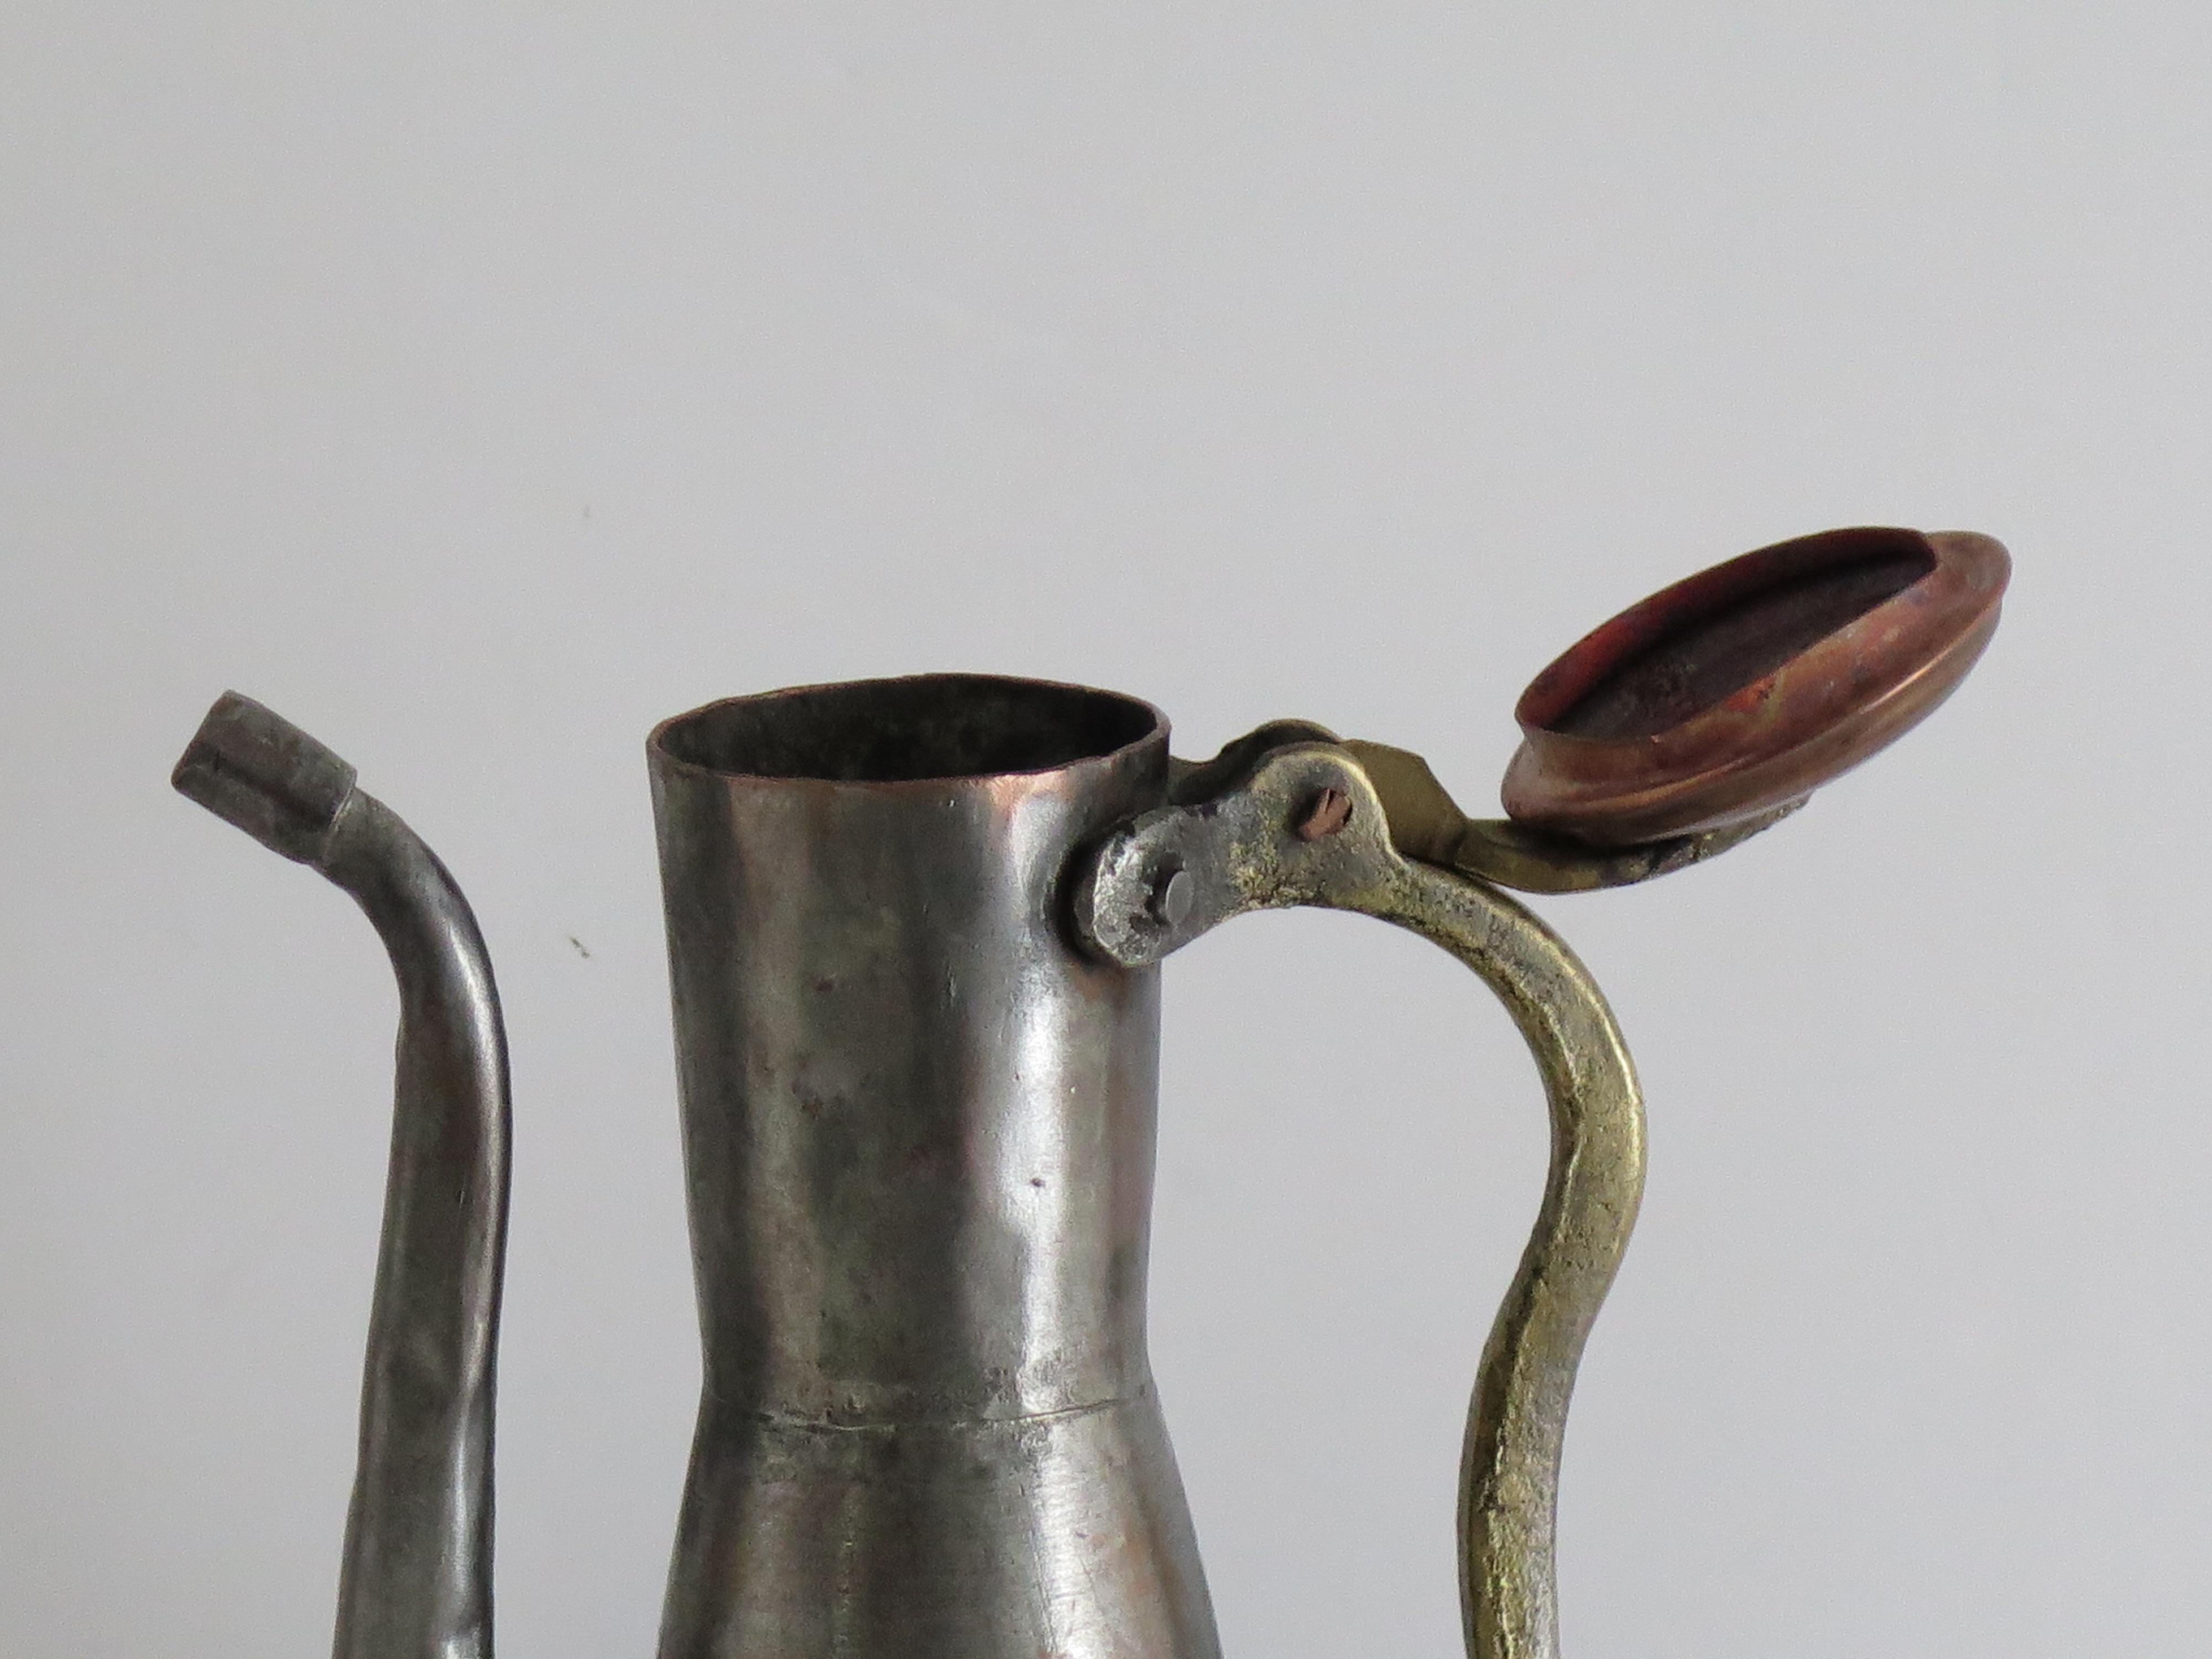 Ewer or Pitcher tinned Copper Turkish / Middle Eastern, Early 19th Century For Sale 3